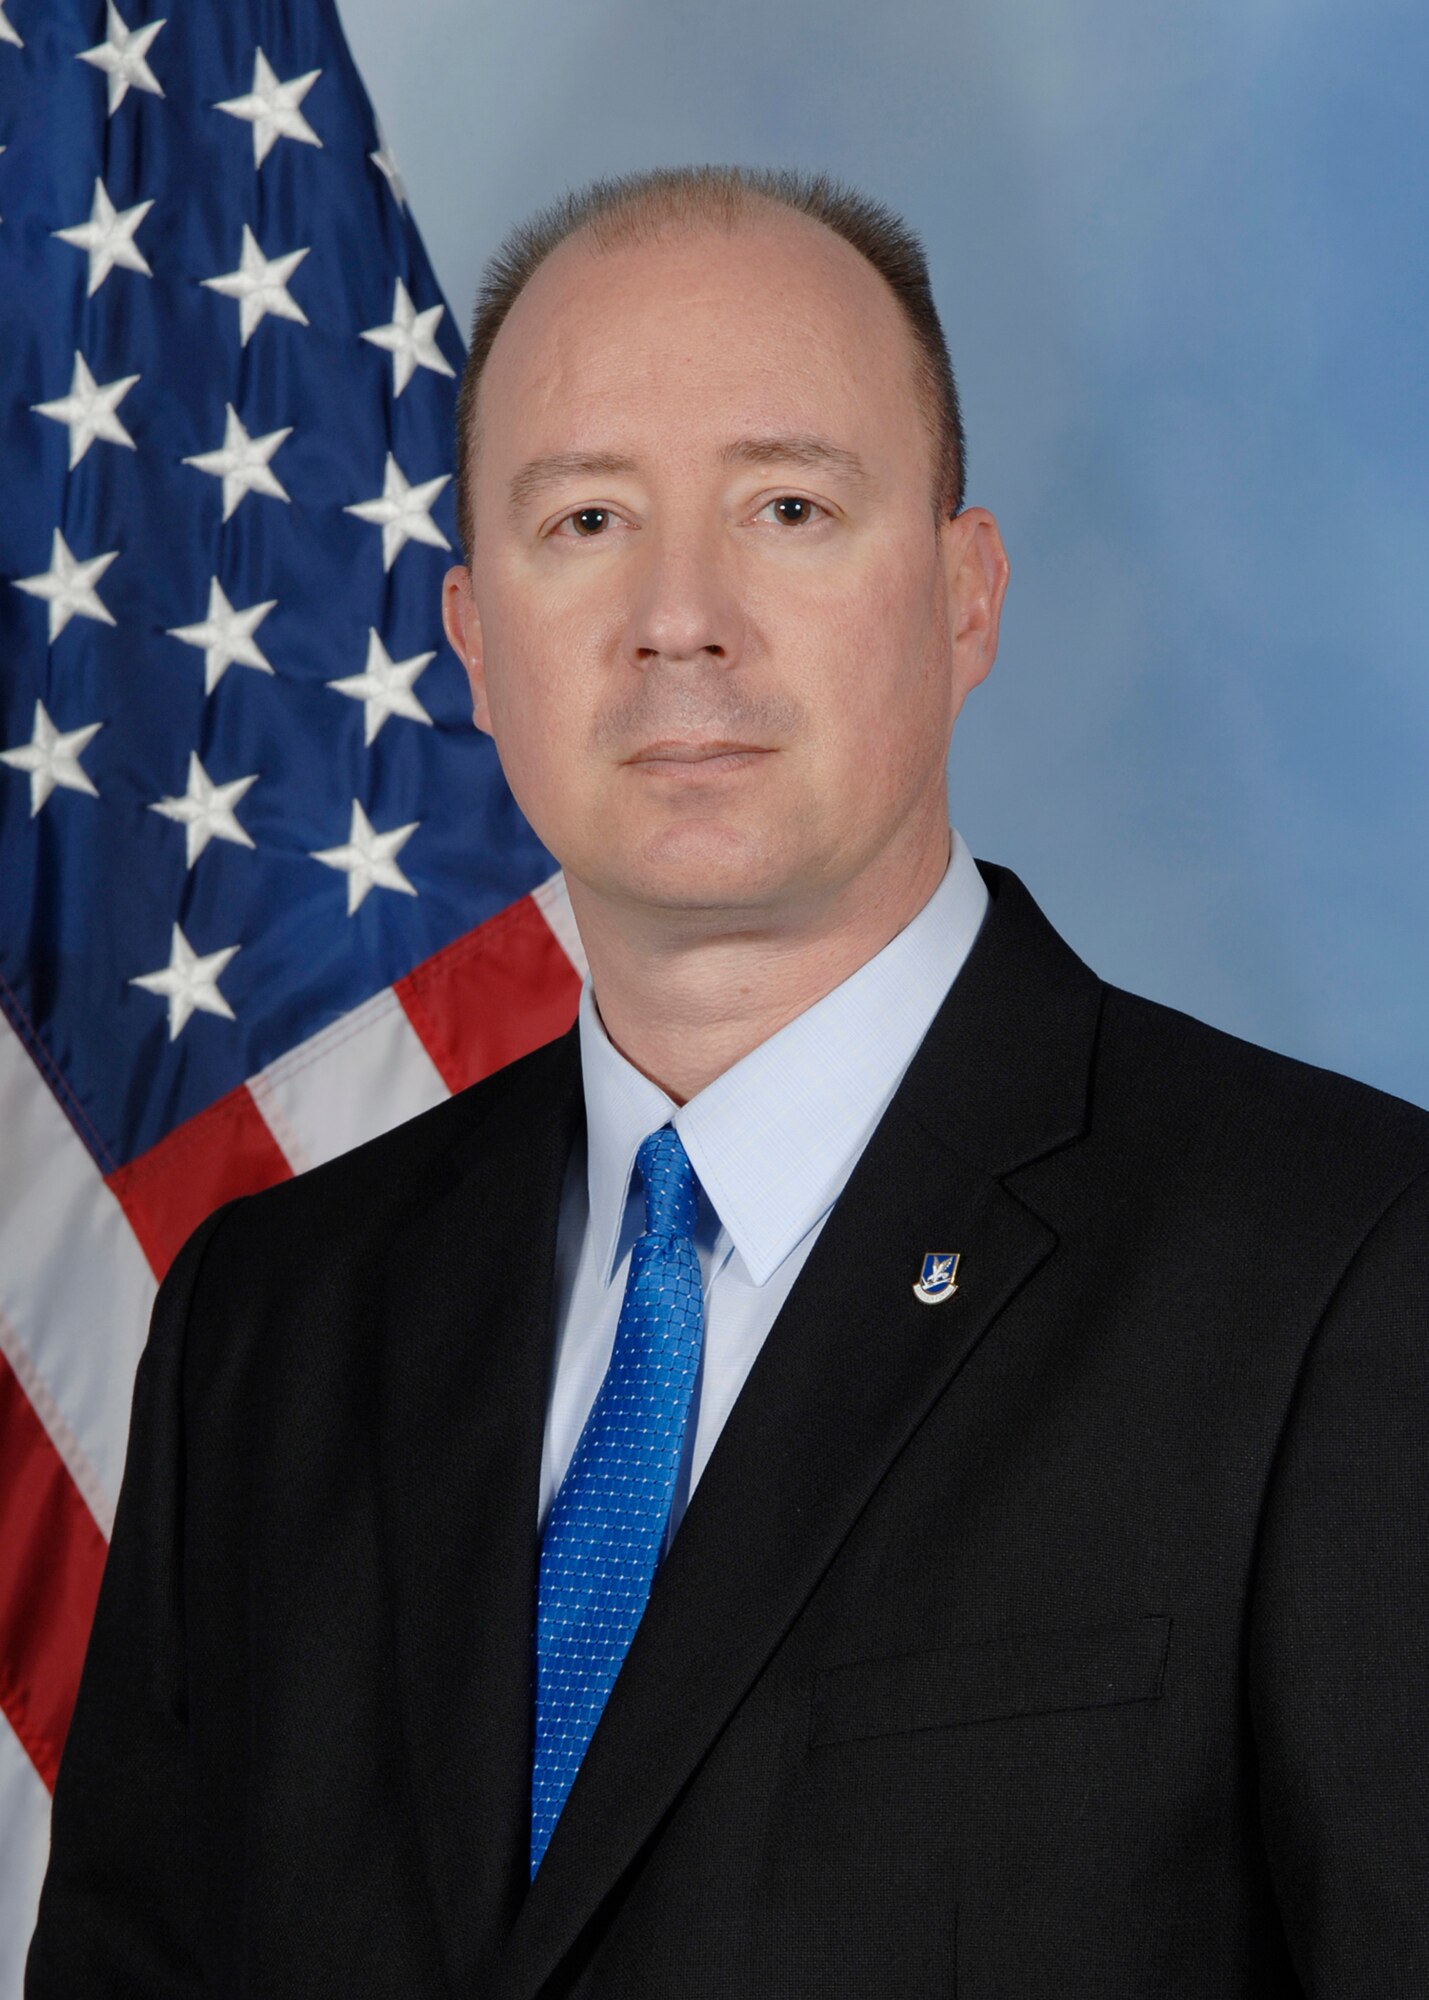 Ken Chrapkowski, 22nd Security Forces Squadron deputy security officer, poses for a photo at McConnell Air Force Base, Kan. Chrapkowski won the 2016 Outstanding Security Forces Support Staff Civilian of the Year Award at the Air Force level. (U.S. Air Force photo)